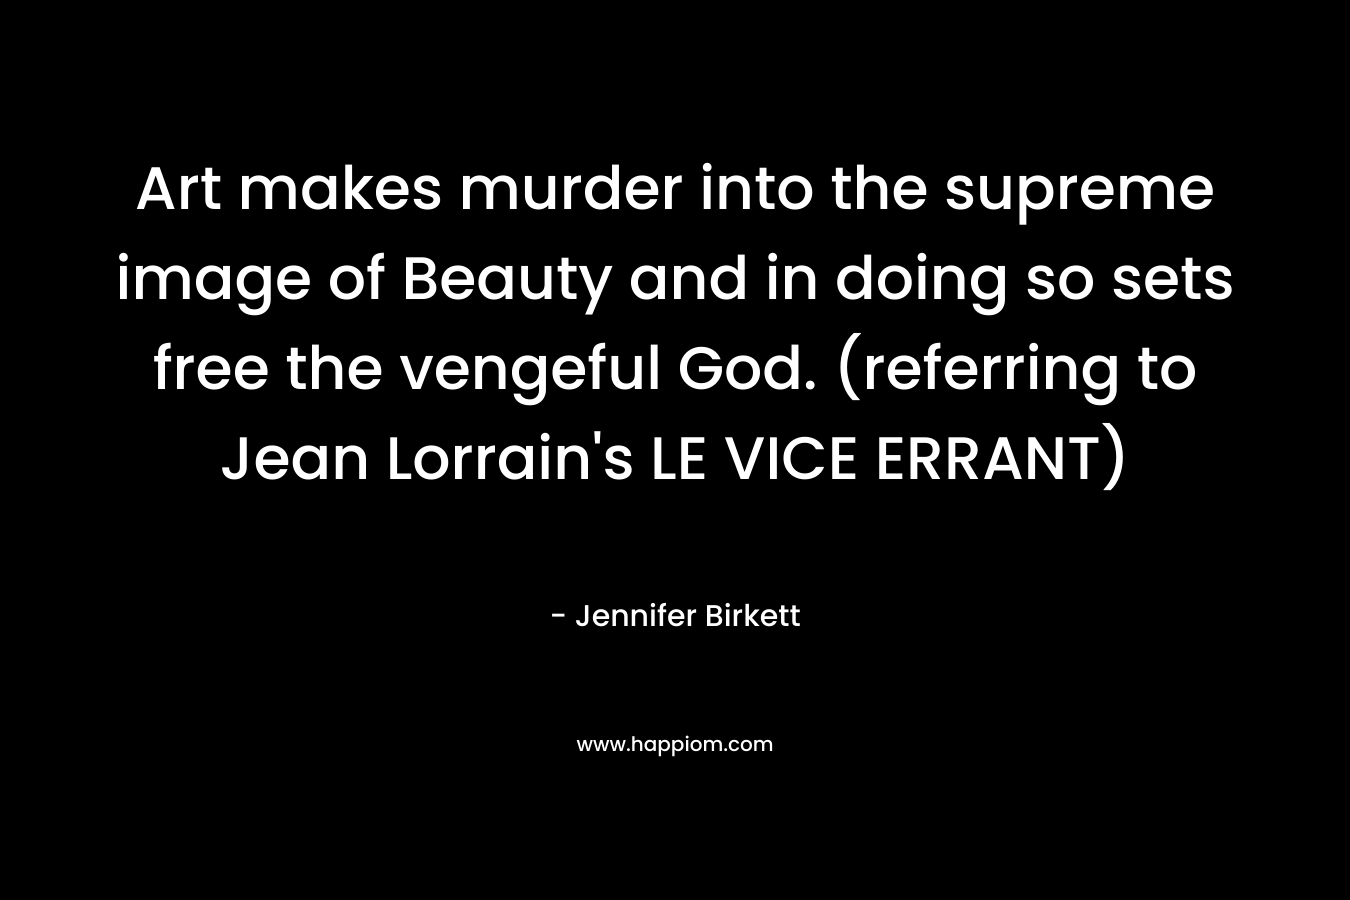 Art makes murder into the supreme image of Beauty and in doing so sets free the vengeful God. (referring to Jean Lorrain's LE VICE ERRANT)